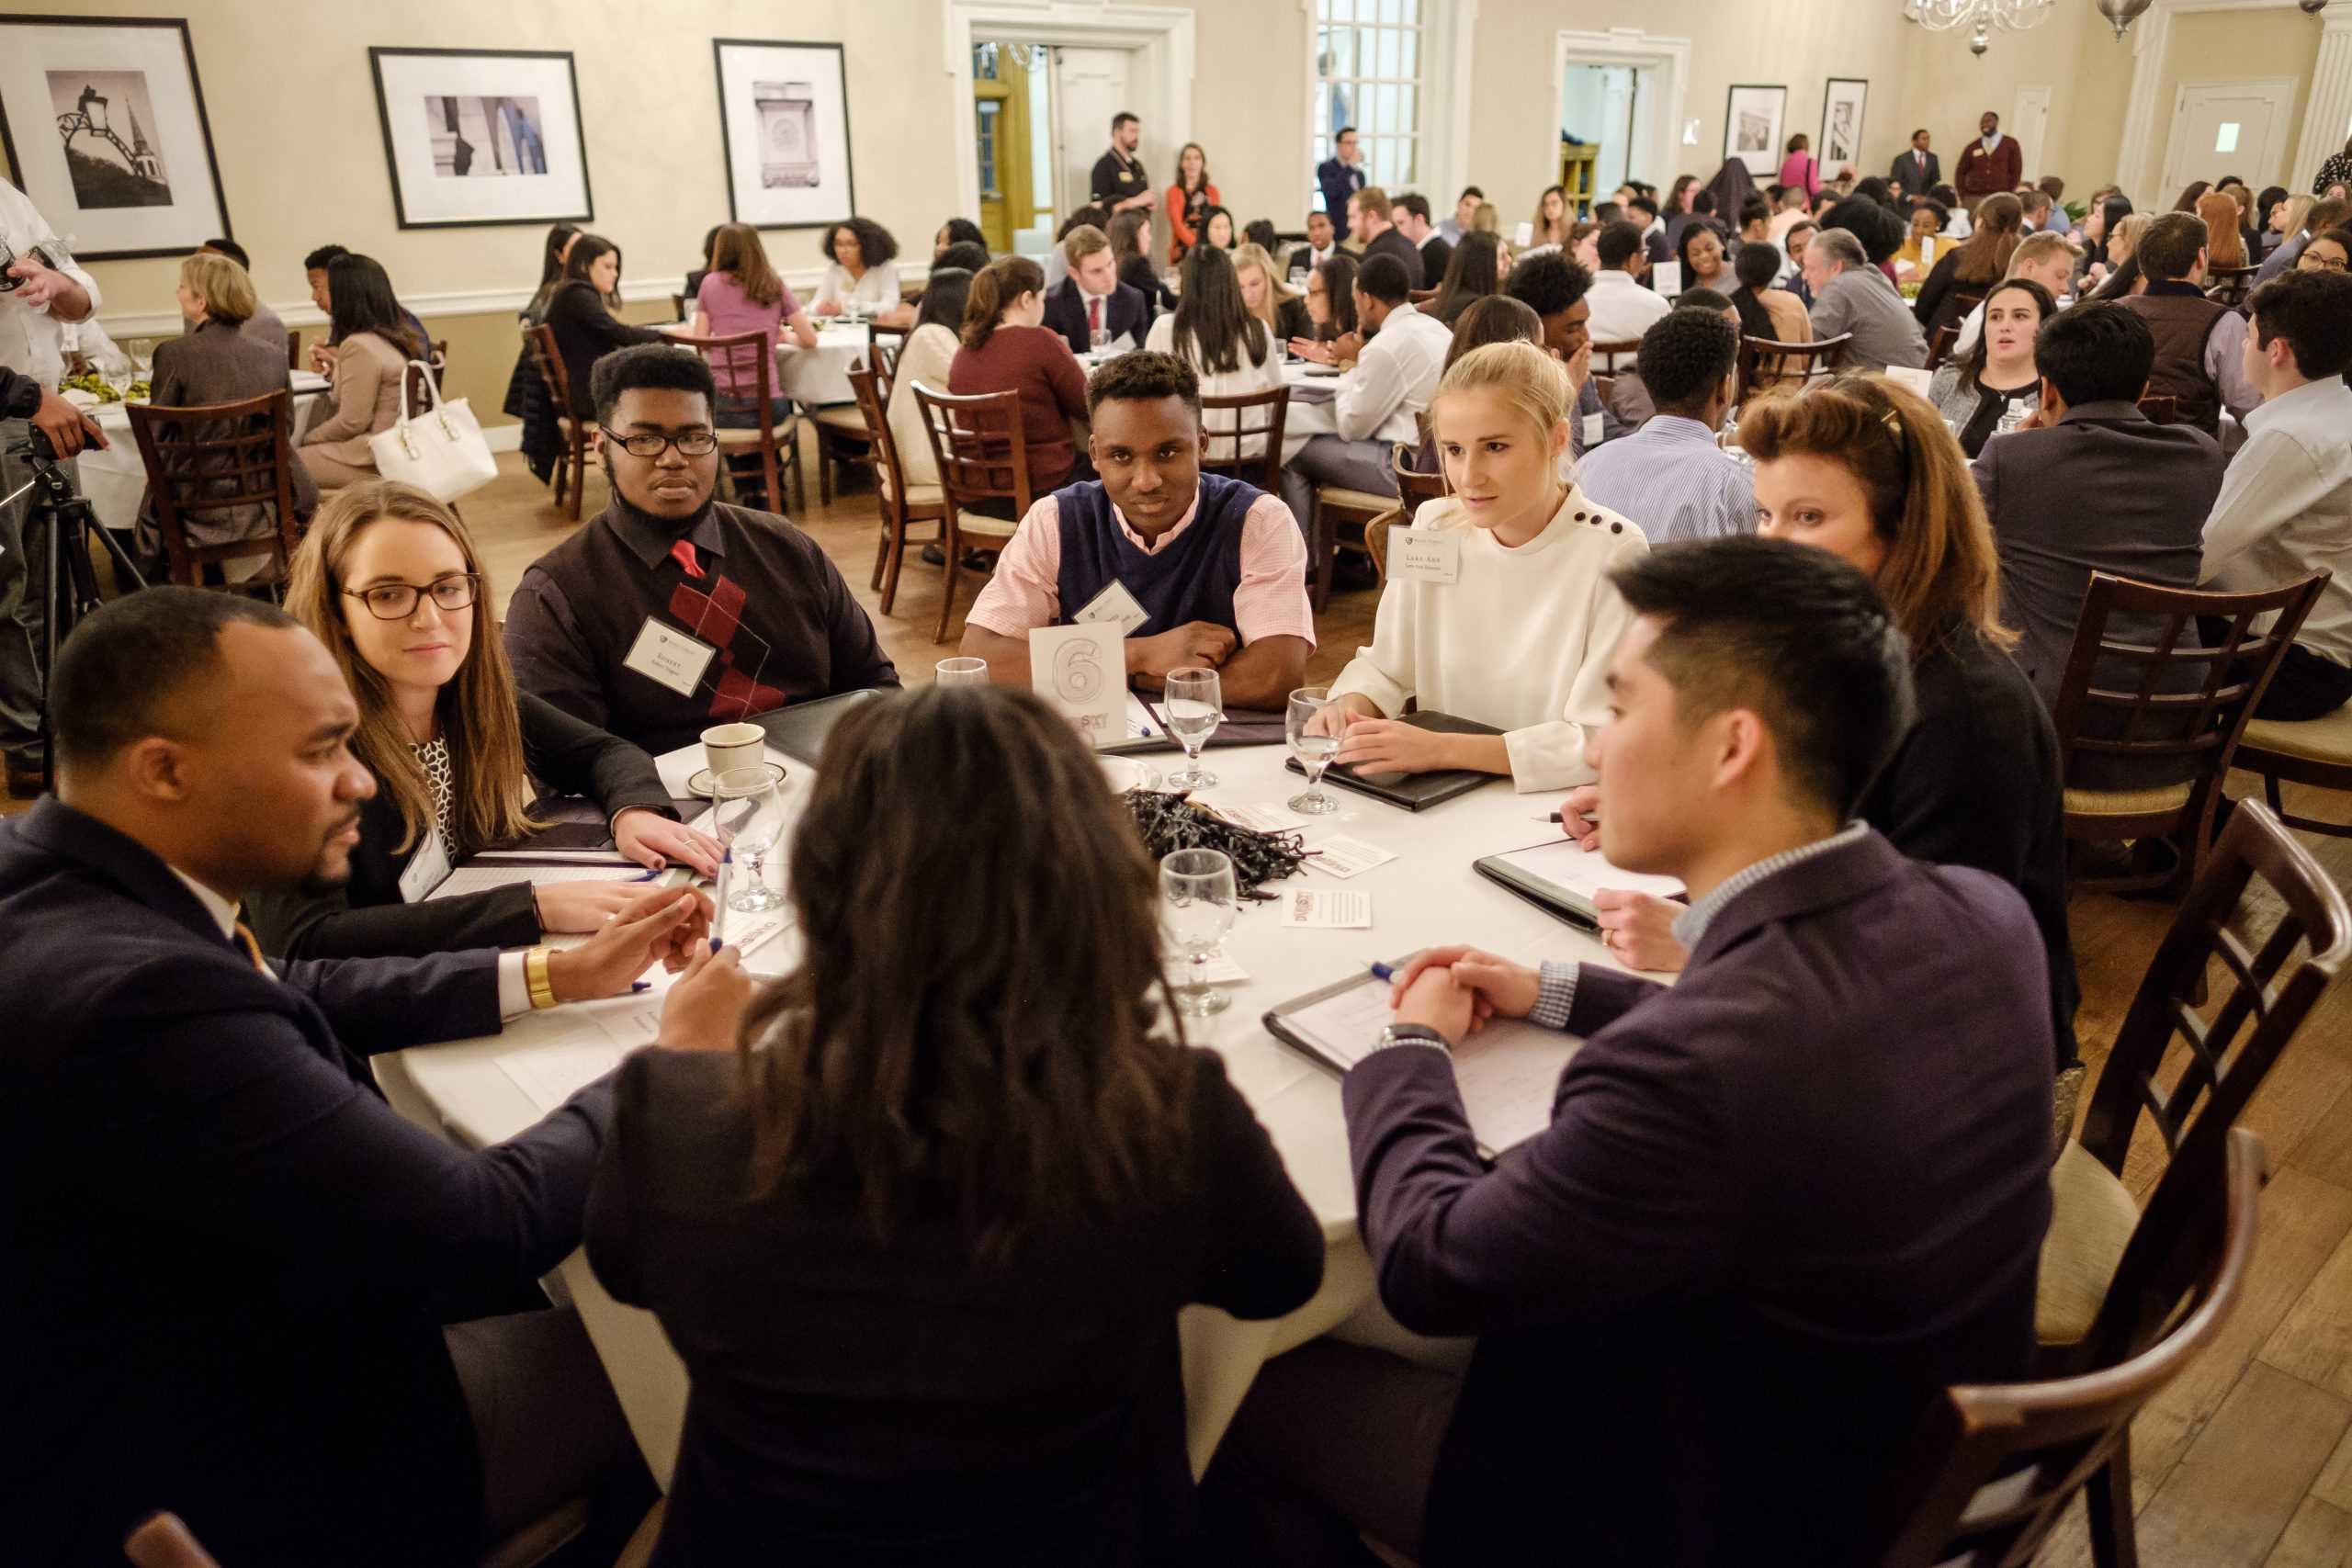 The Wake Forest Office of Personal and Career Development hosts an event, Diversity Matters, for students to talk with recruiters from regional and national companies, in the Magnolia Room on Tuesday, January 23, 2018.